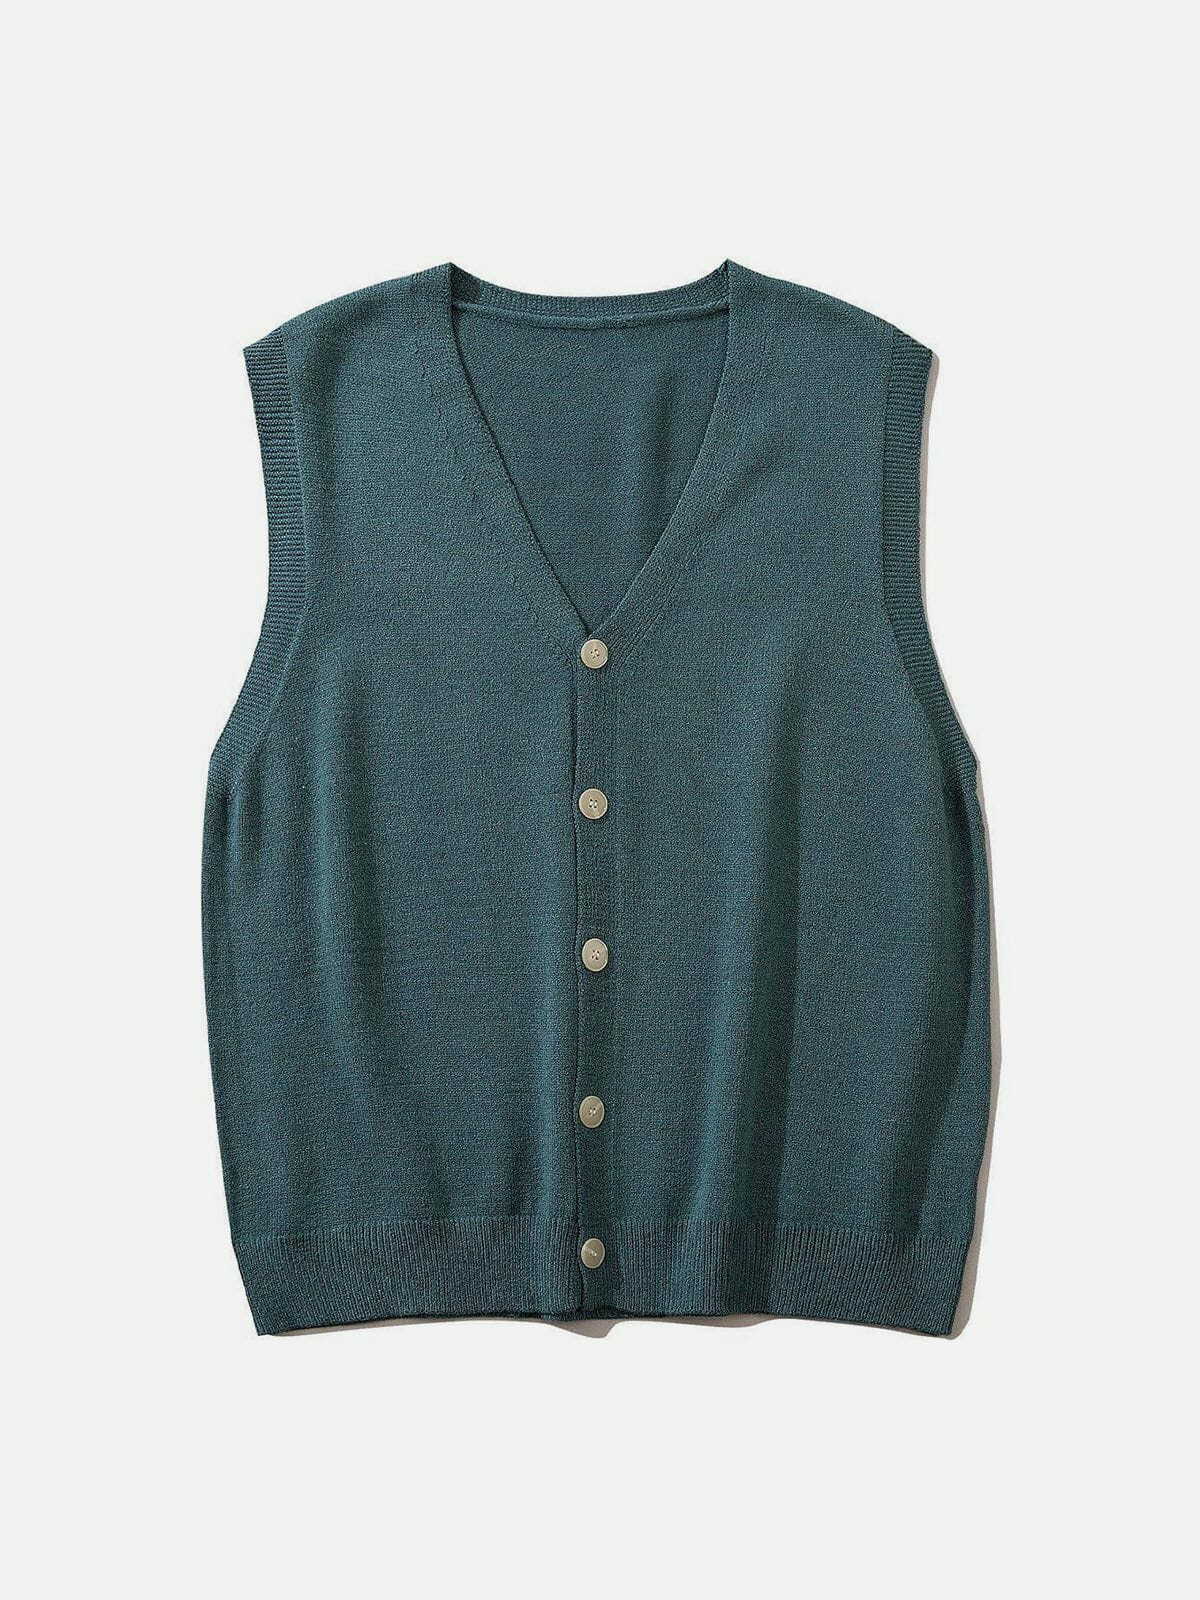 chic solid color sweater vest timeless style & urban comfort 3883